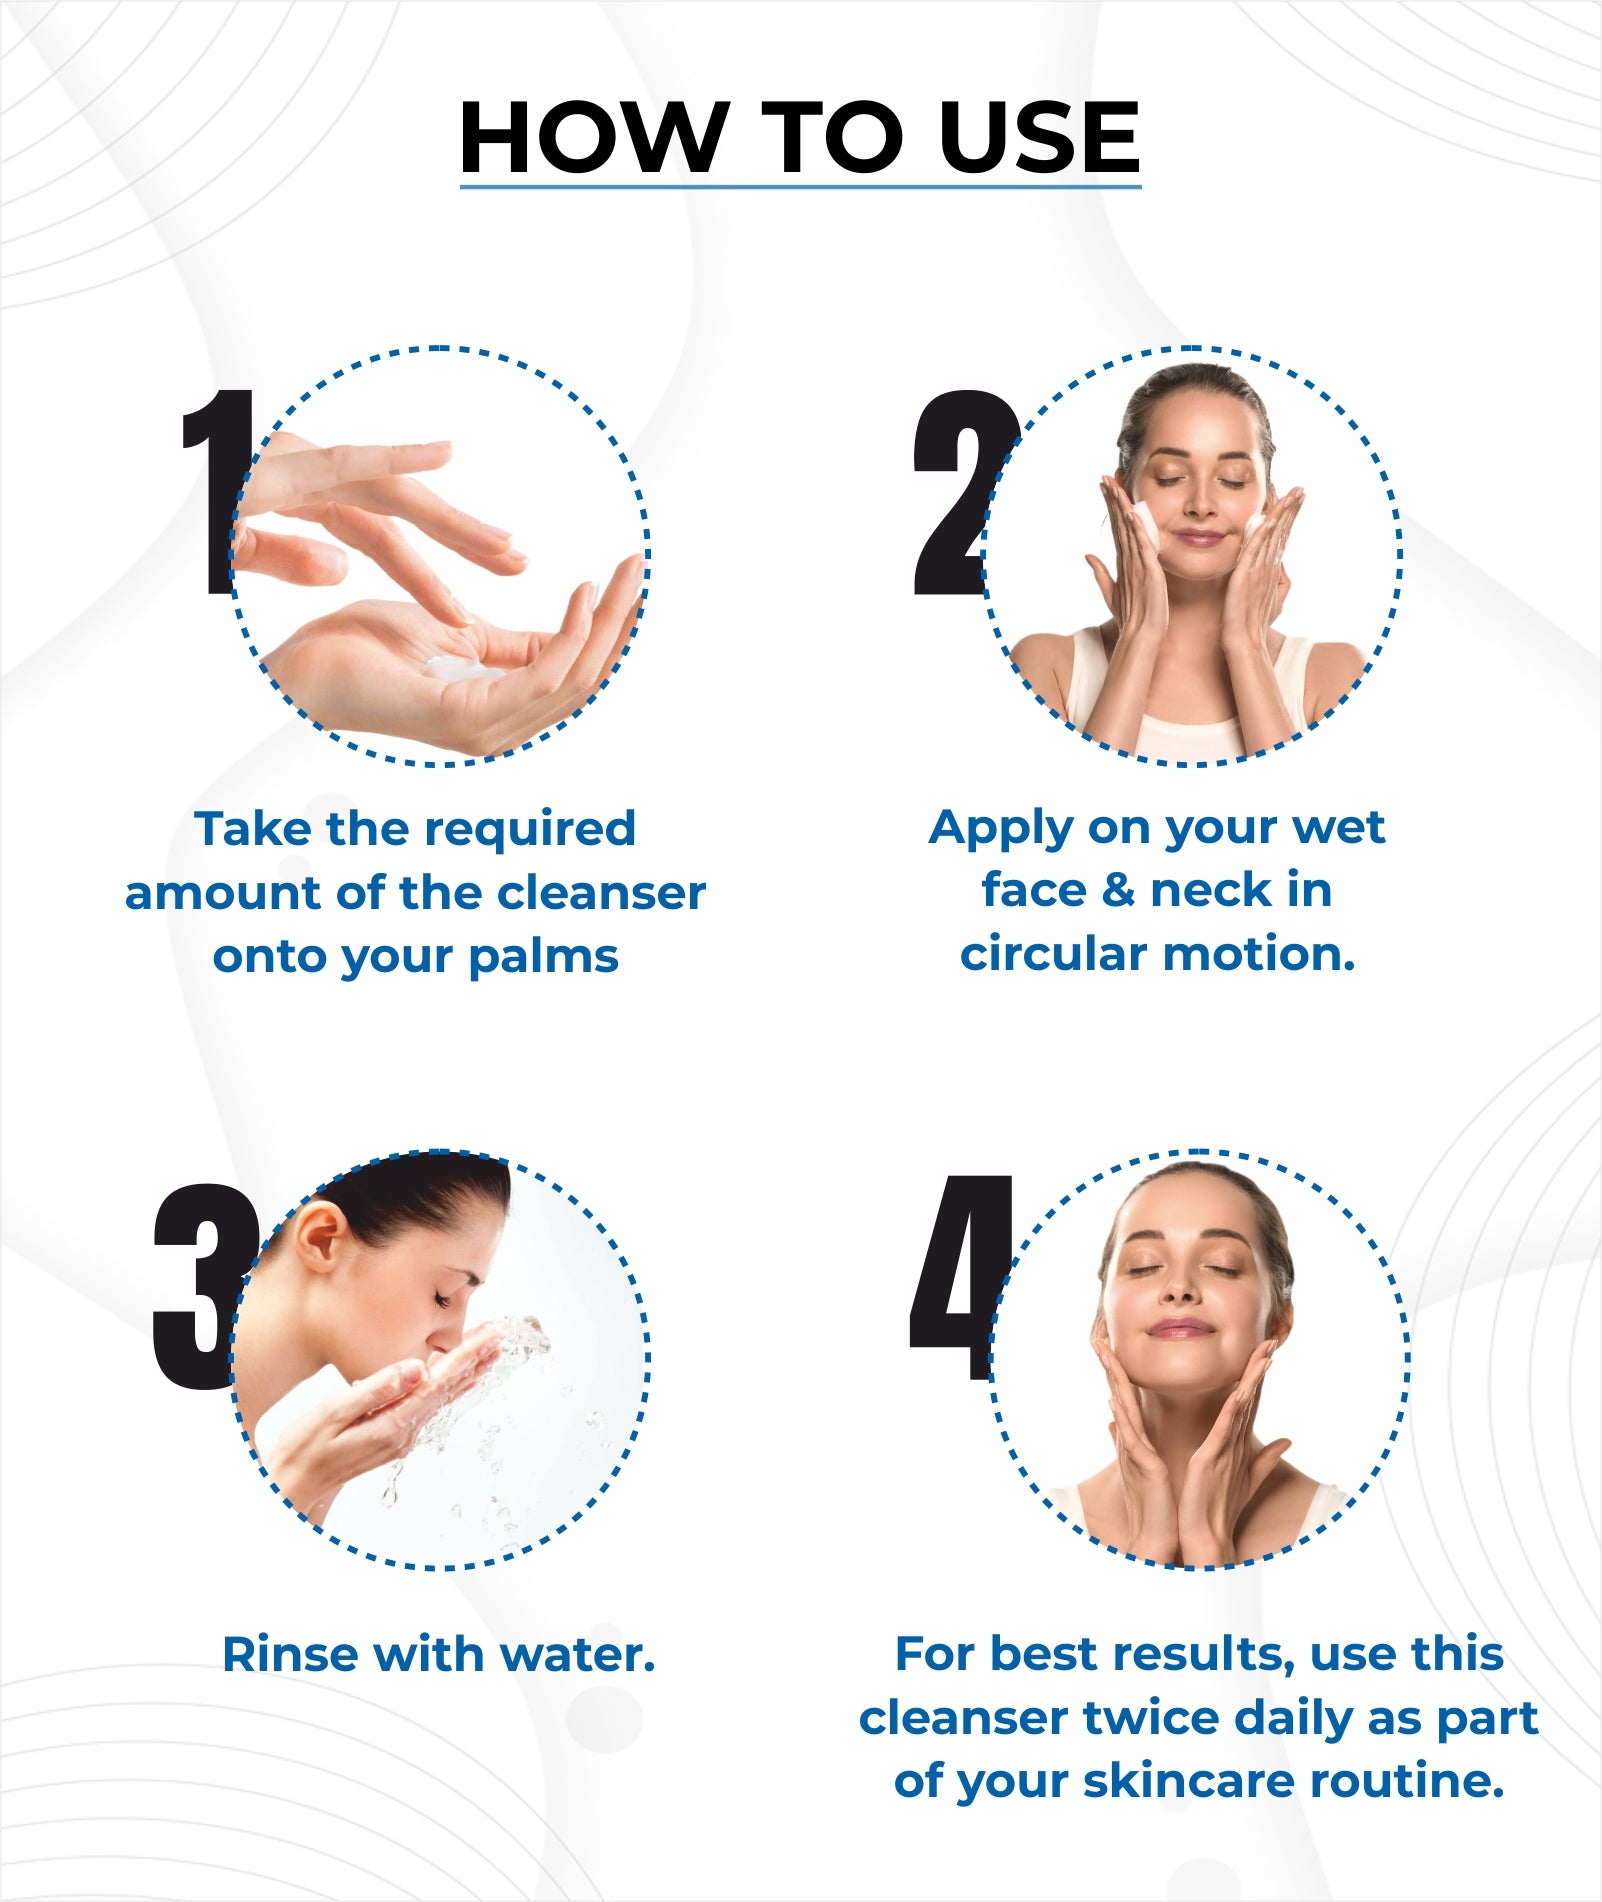 How to use our face cleanser for effective results